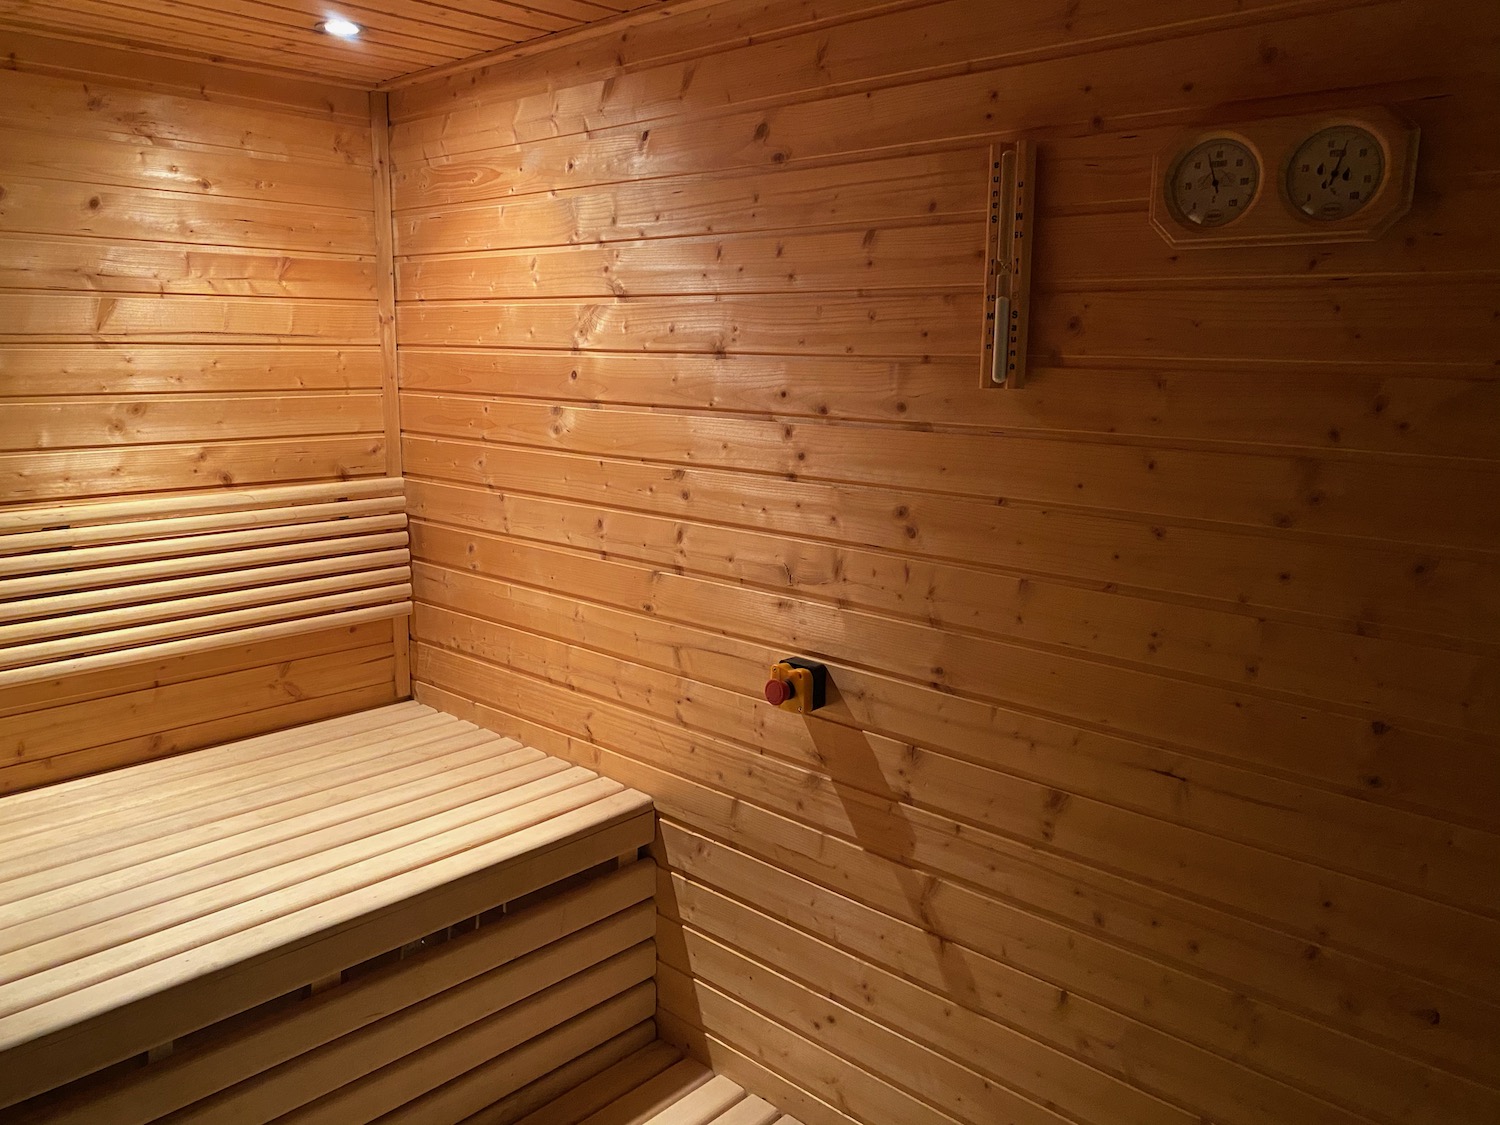 a wooden sauna with a red button and a clock